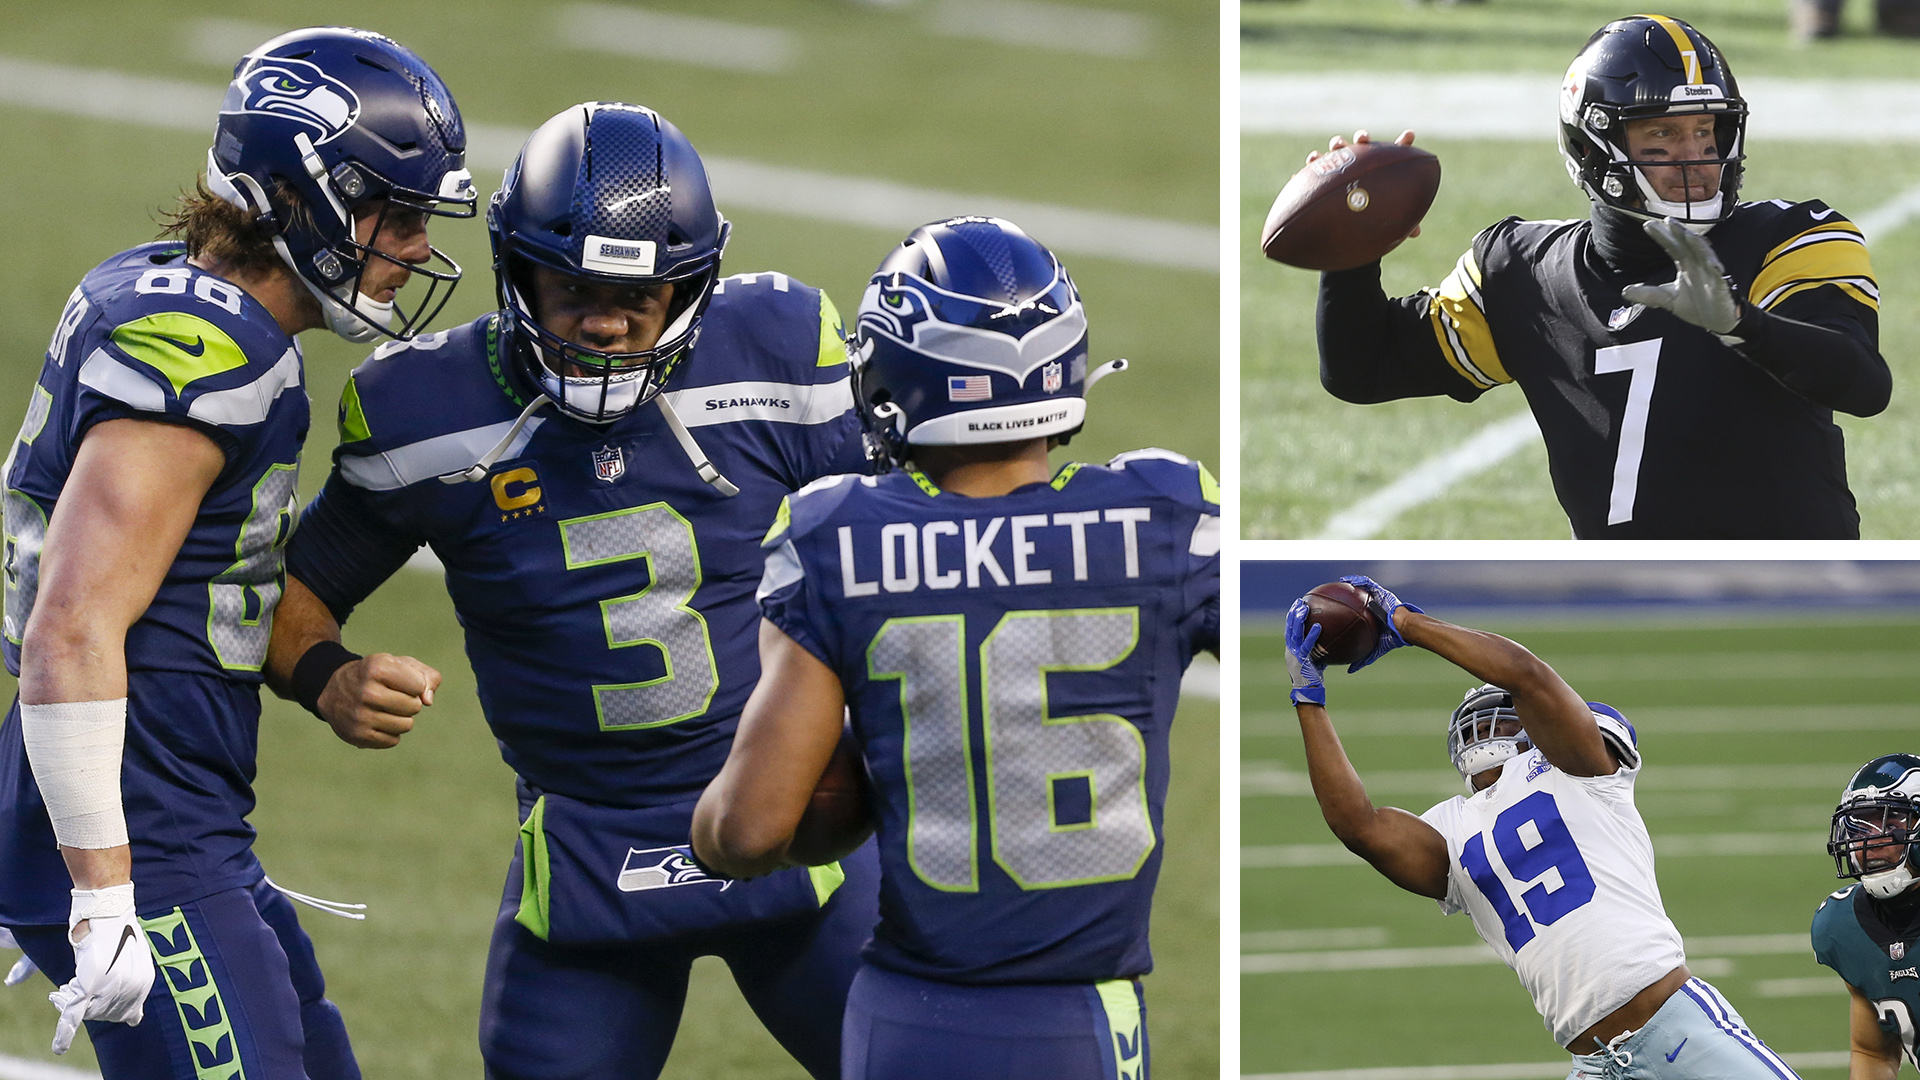 Week 16 takeaways: Old-fashioned Seahawks win the West, Big Ben looks young again, Cowboys live